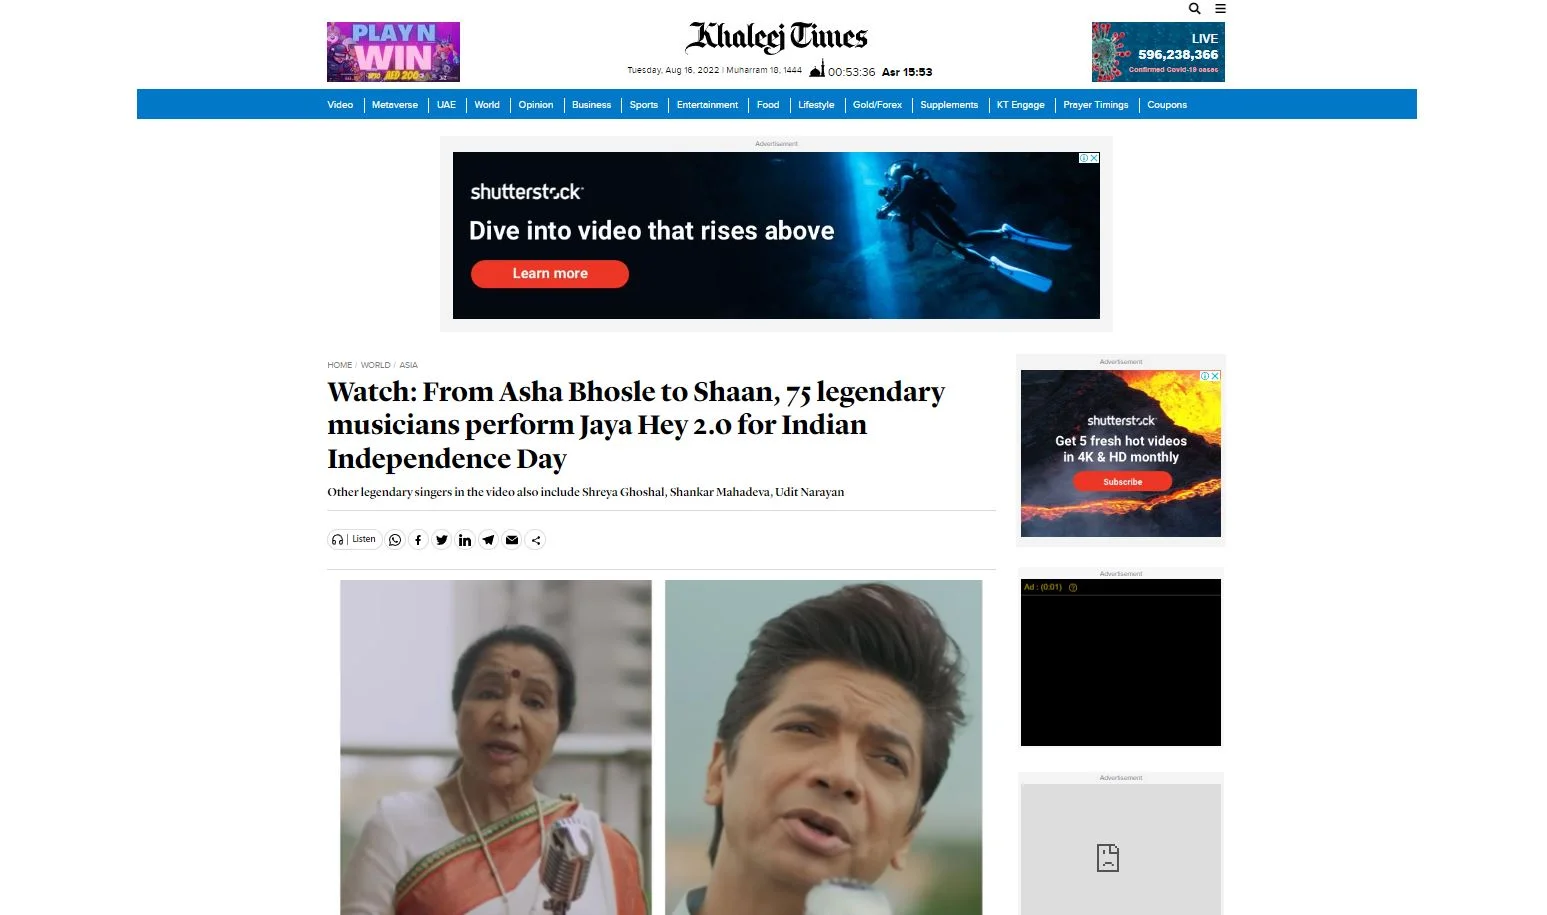 Watch: From Asha Bhosle to Shaan, 75 legendary musicians perform Jaya Hey 2.0 for Indian Independence Day